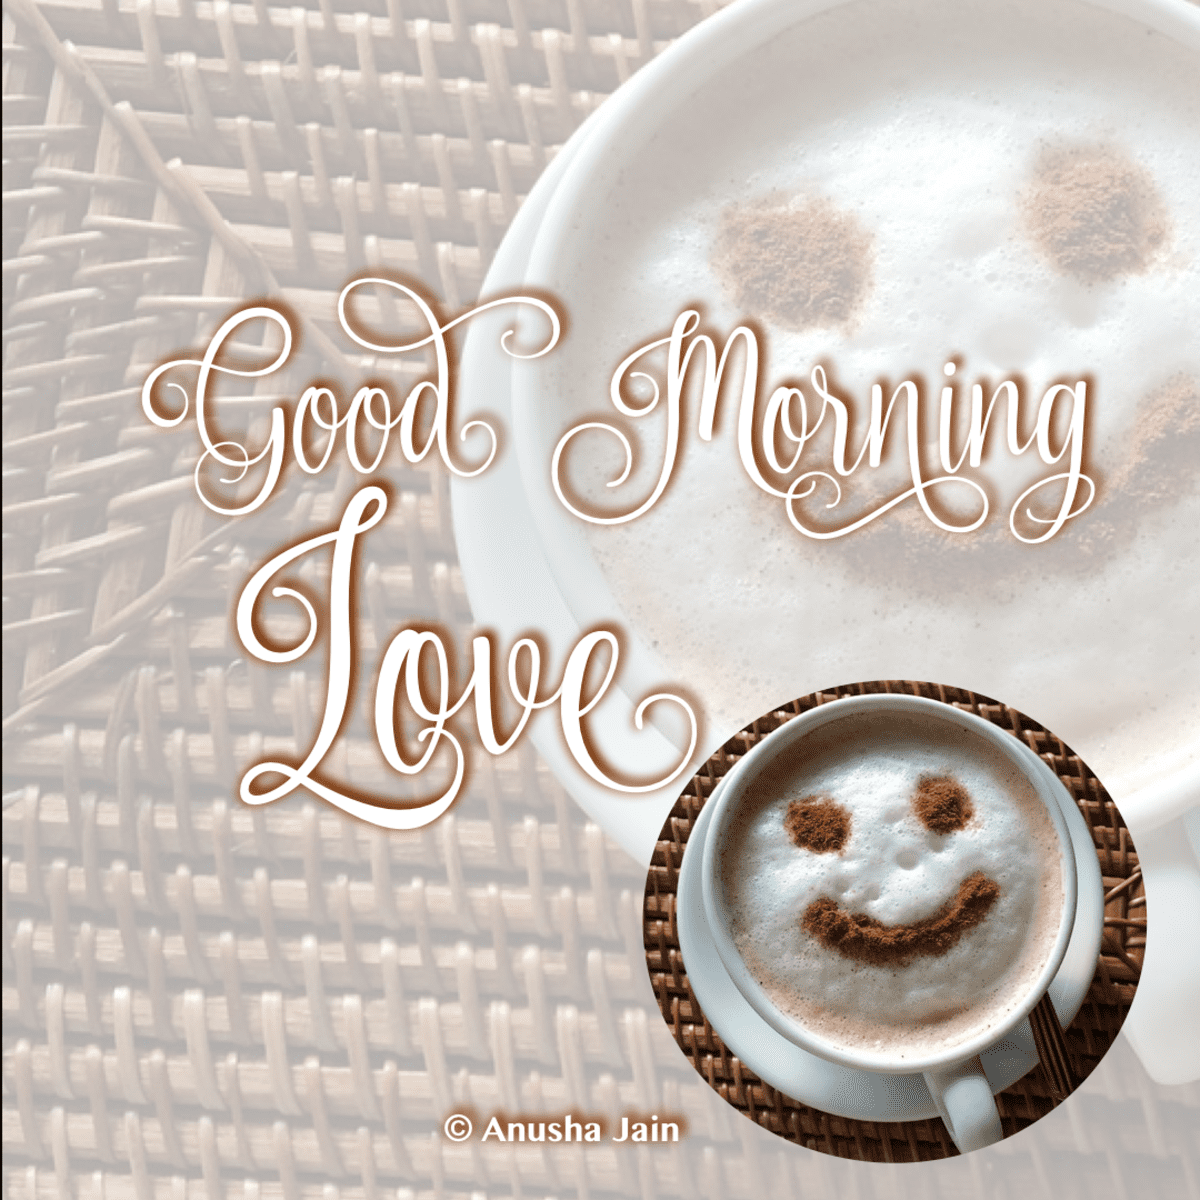 Good Morning Love: Quotes, Romantic Texts, Poems for Him and Her -  LetterPile